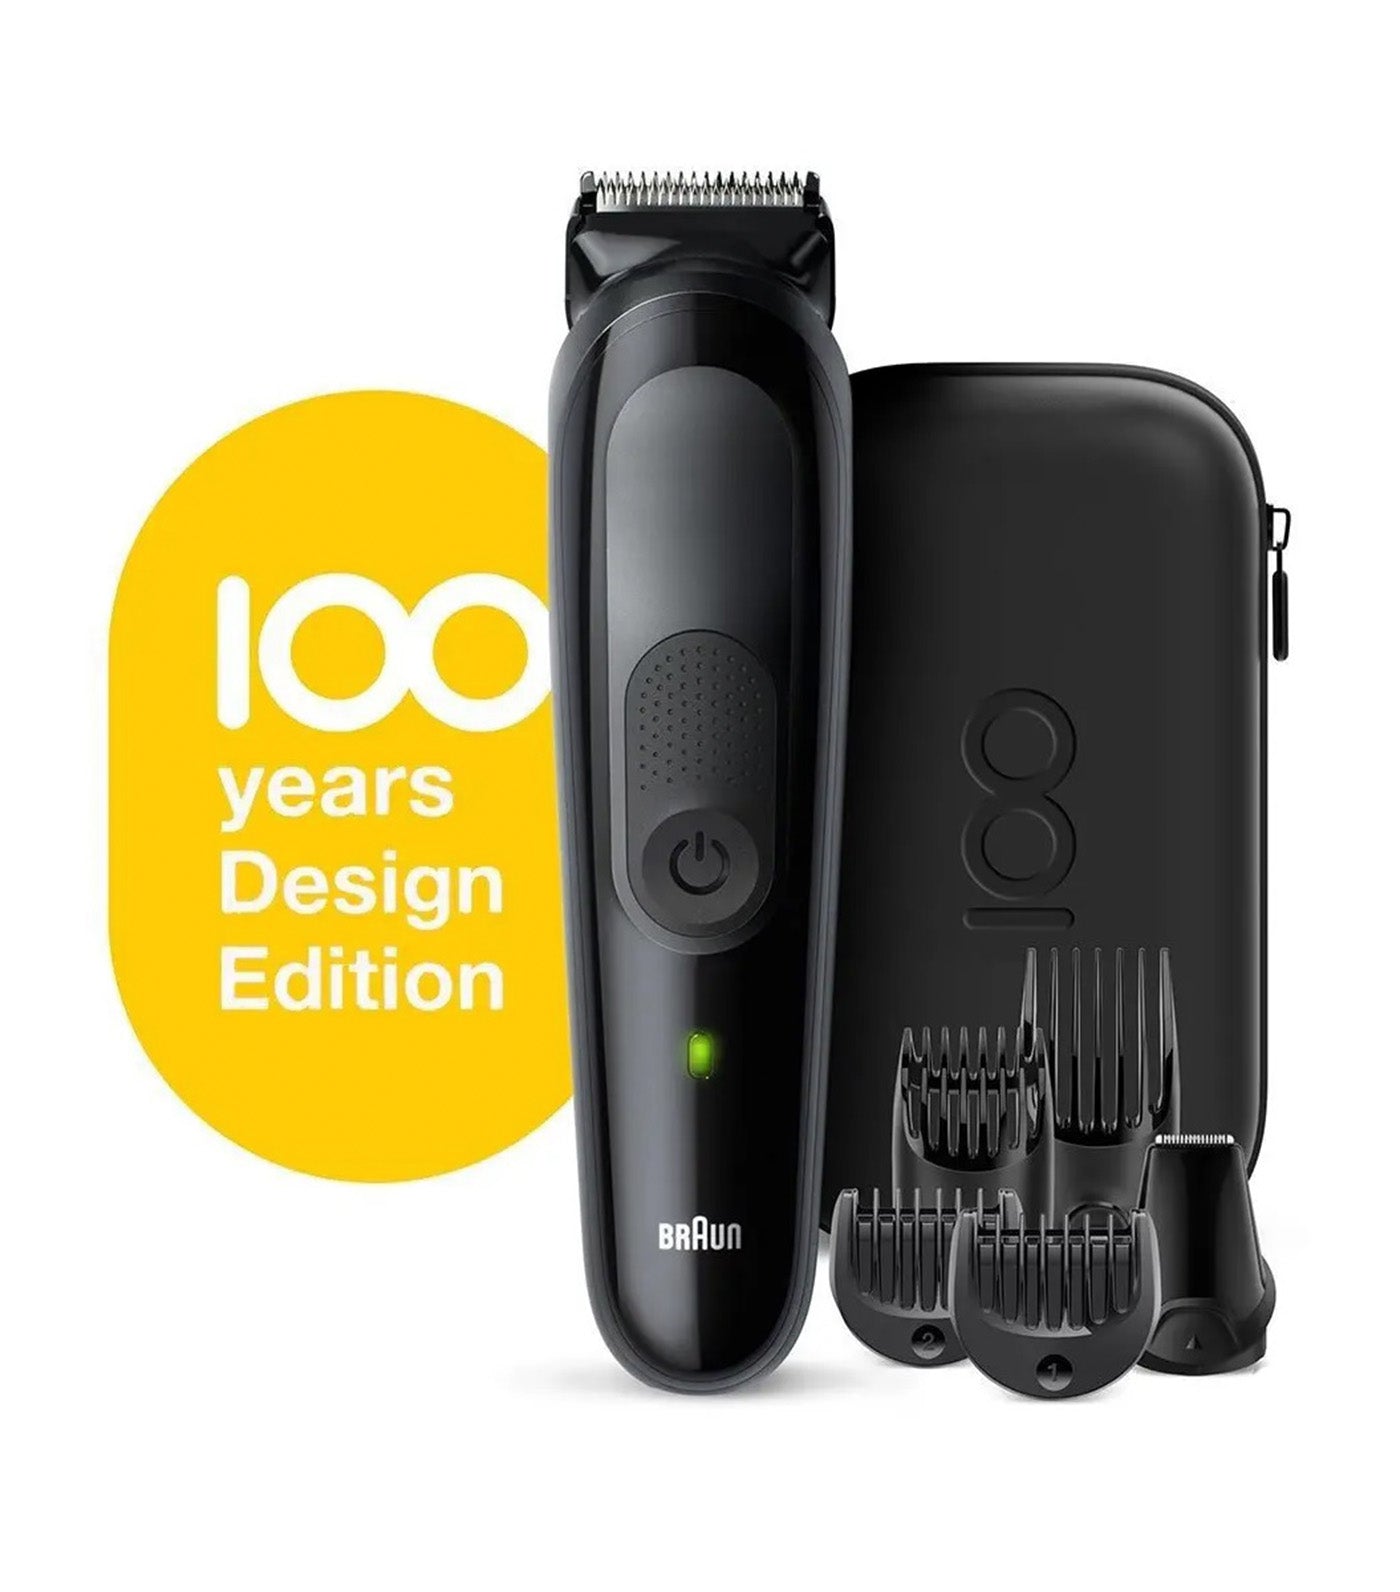 6-In-1 Styling Kit Precise Styling For Face and Head 100 Years Limited Edition with Travel Case Black